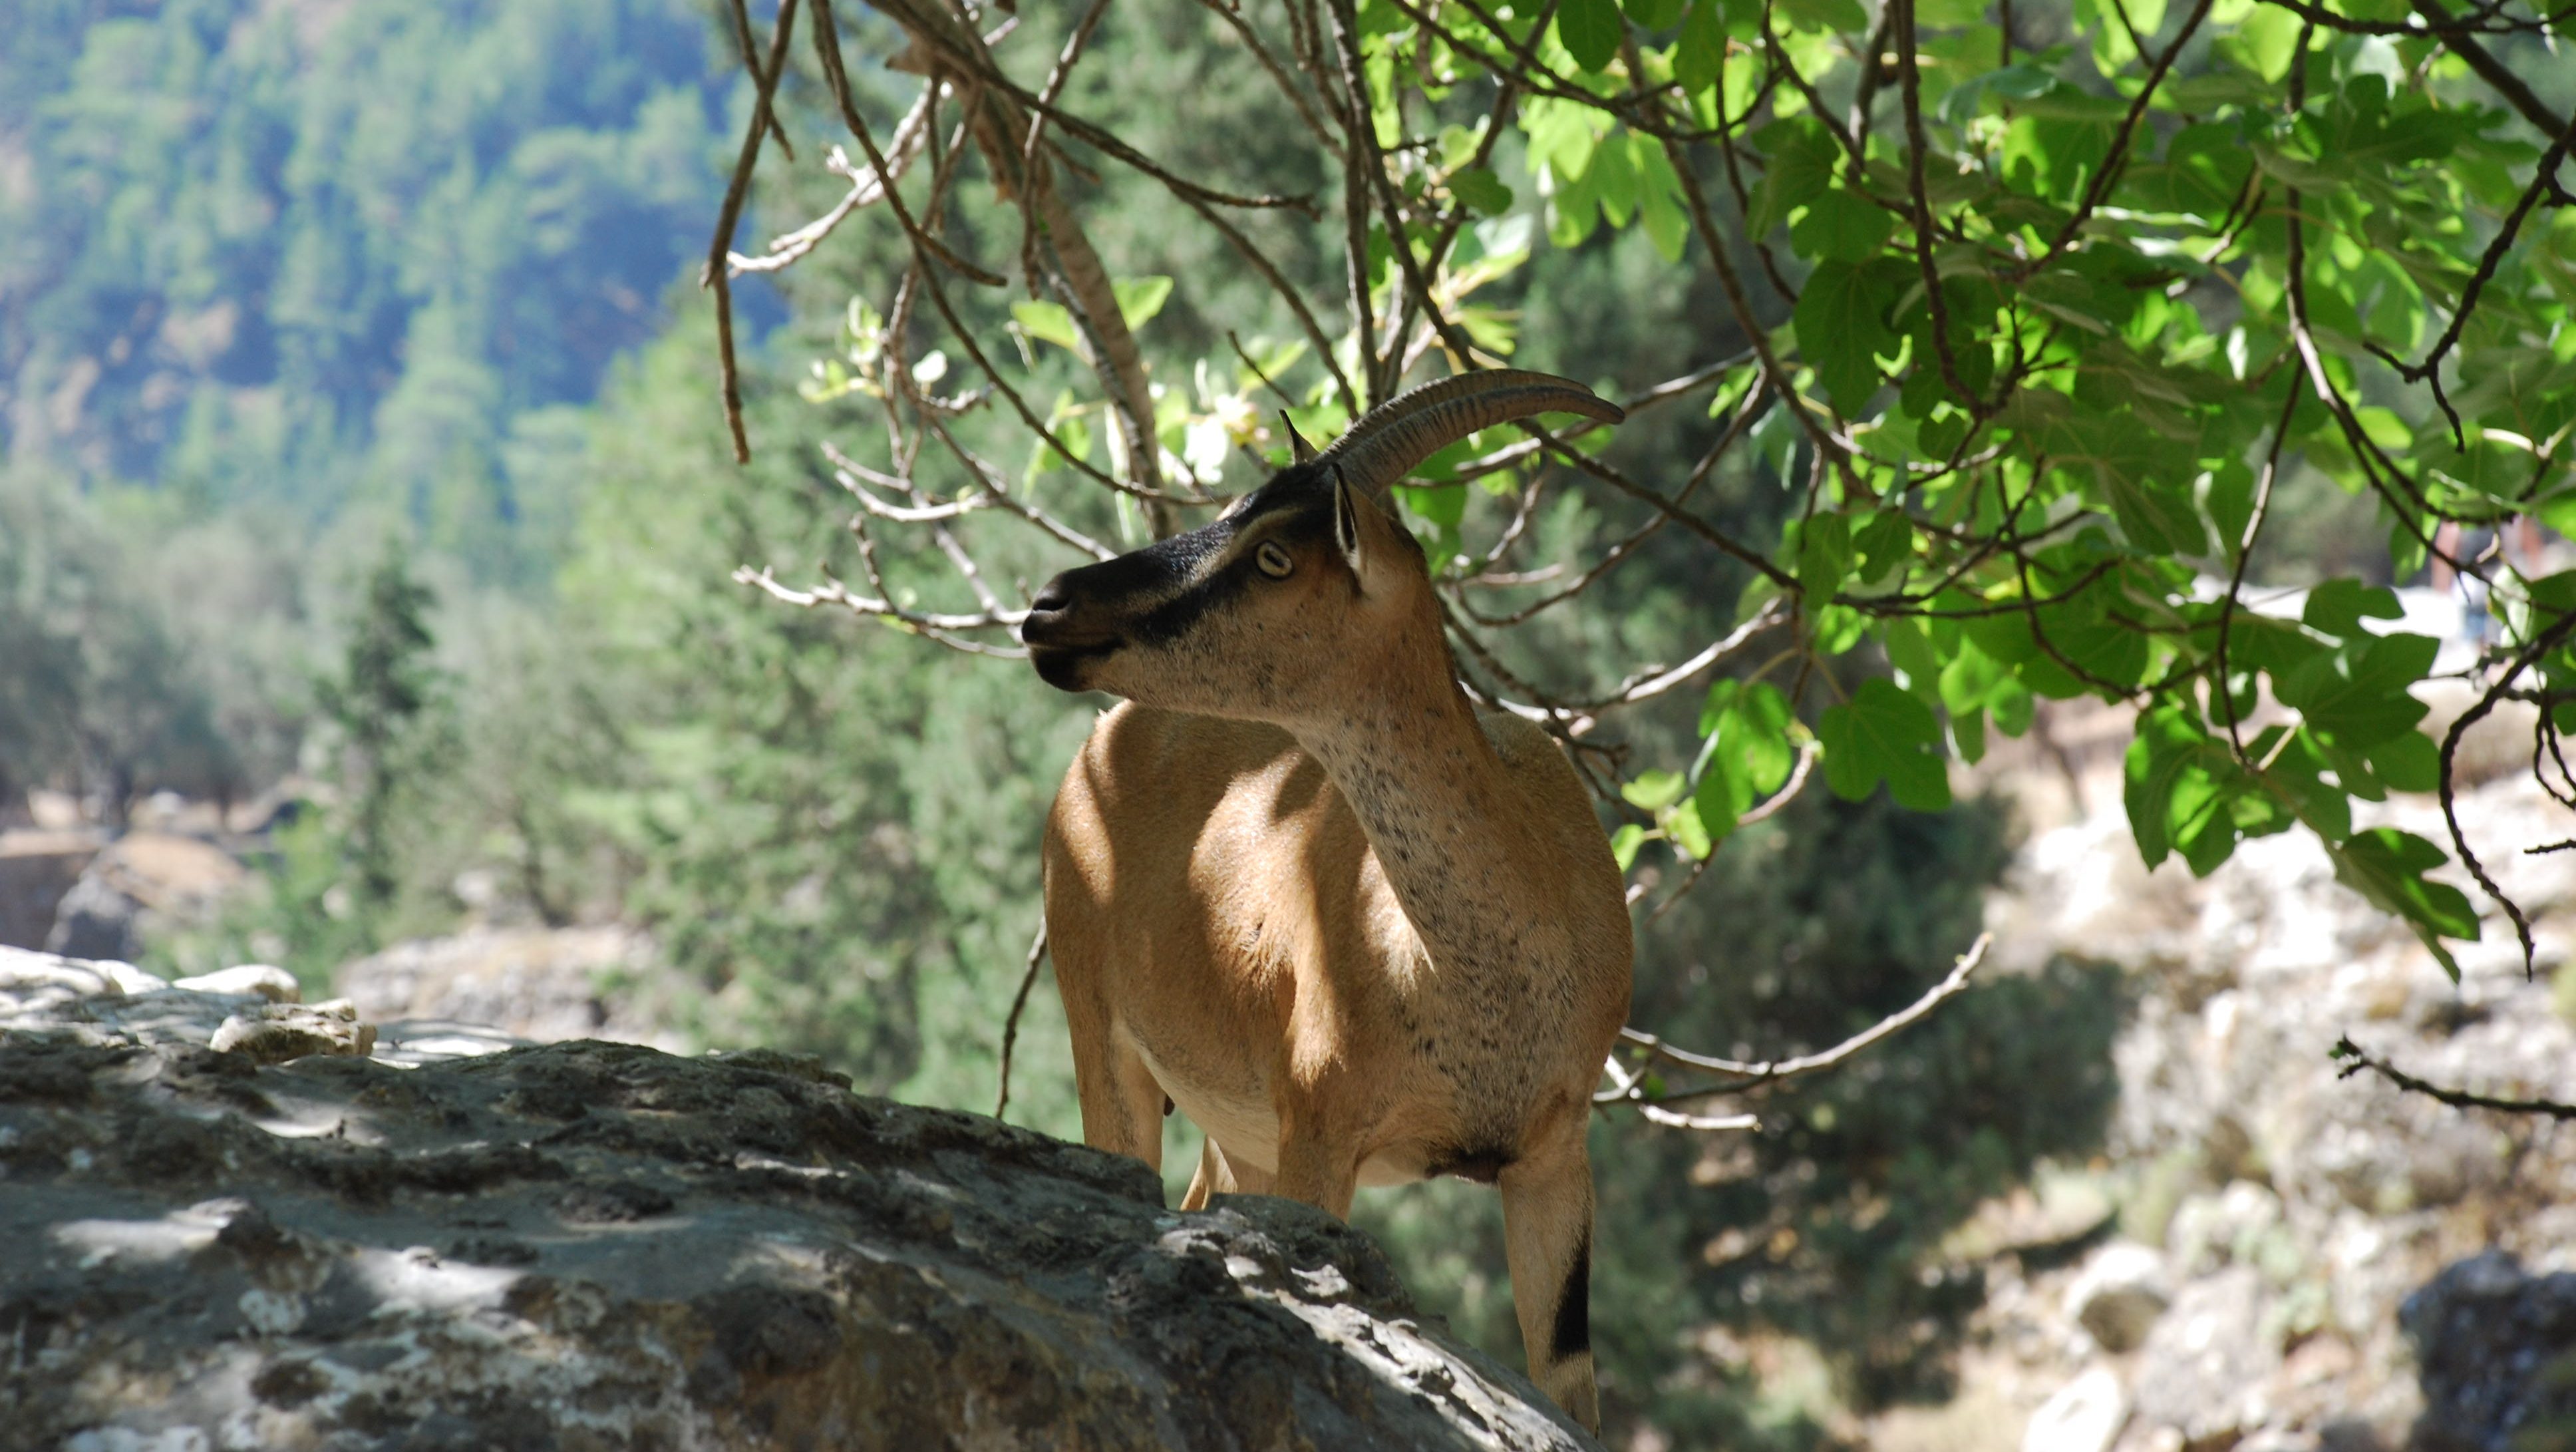 small goat-like animal in the shade